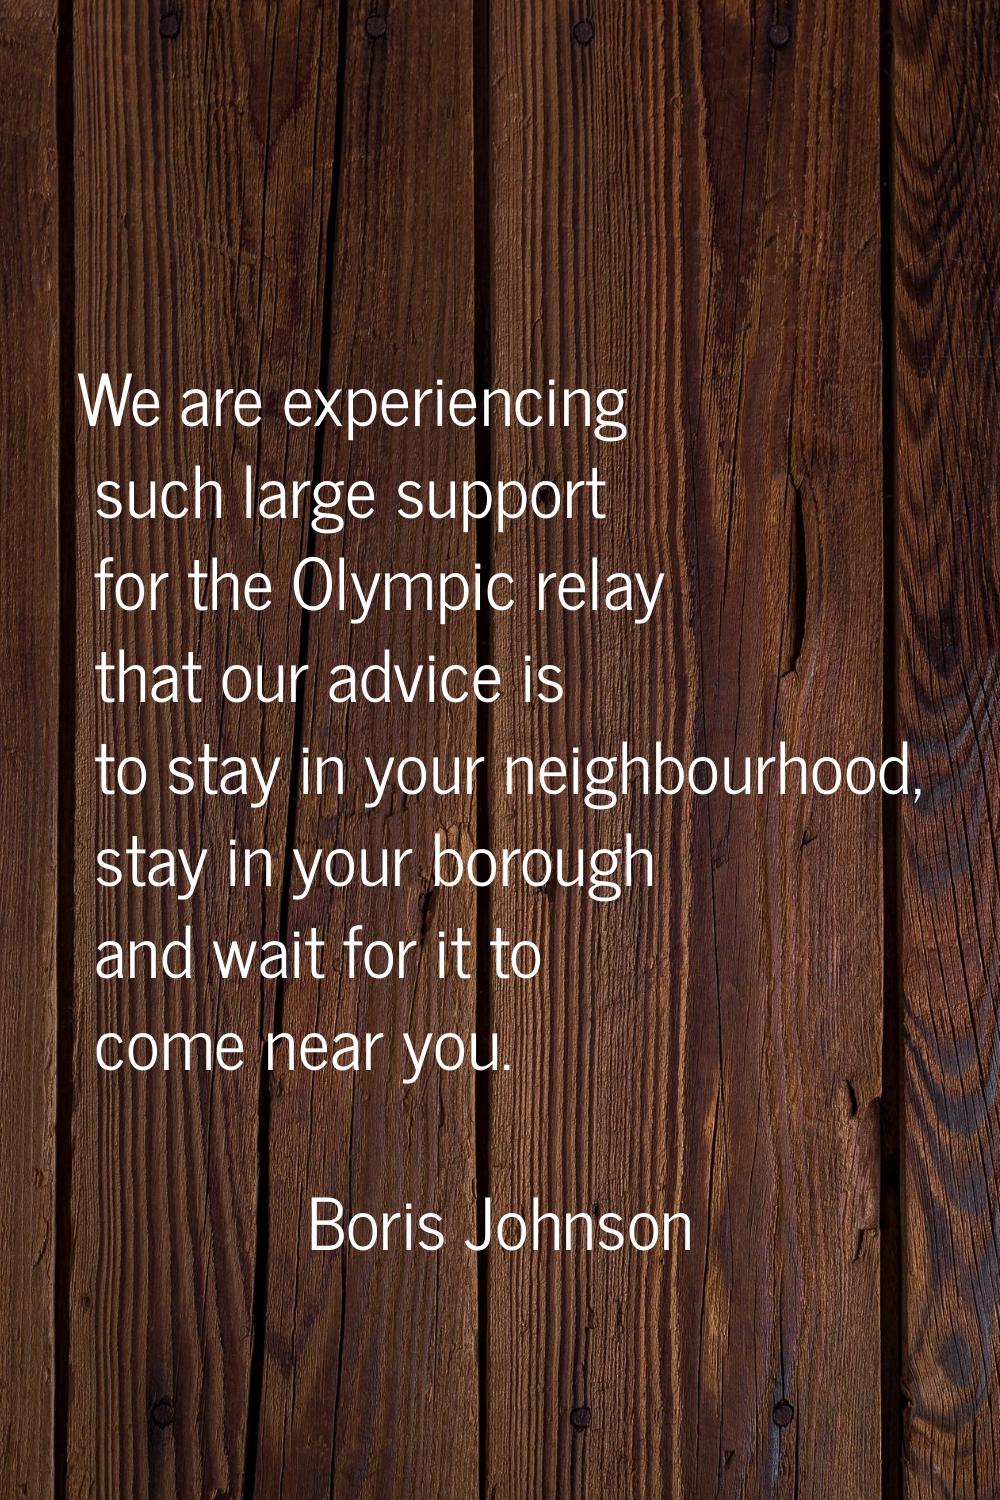 We are experiencing such large support for the Olympic relay that our advice is to stay in your nei